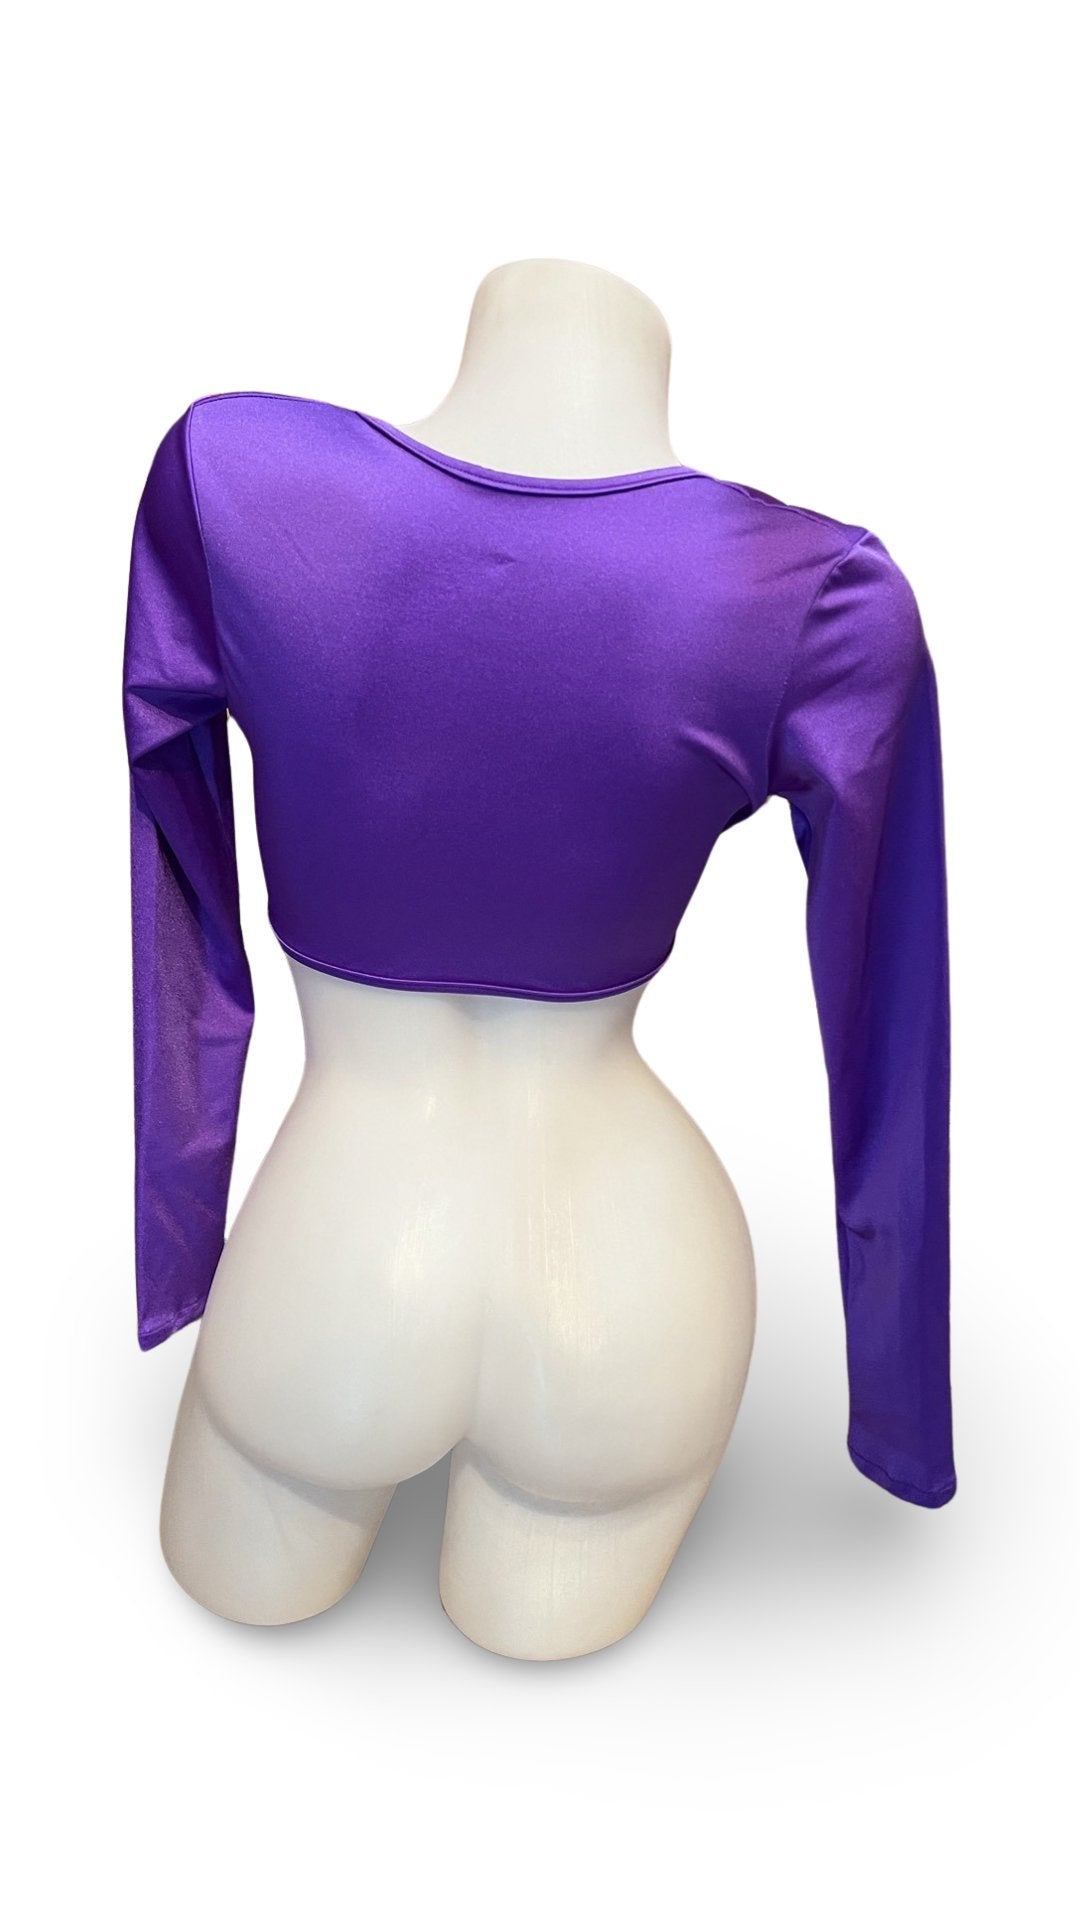 Sleeved Clip Crop Top Purple - Model Express VancouverClothing